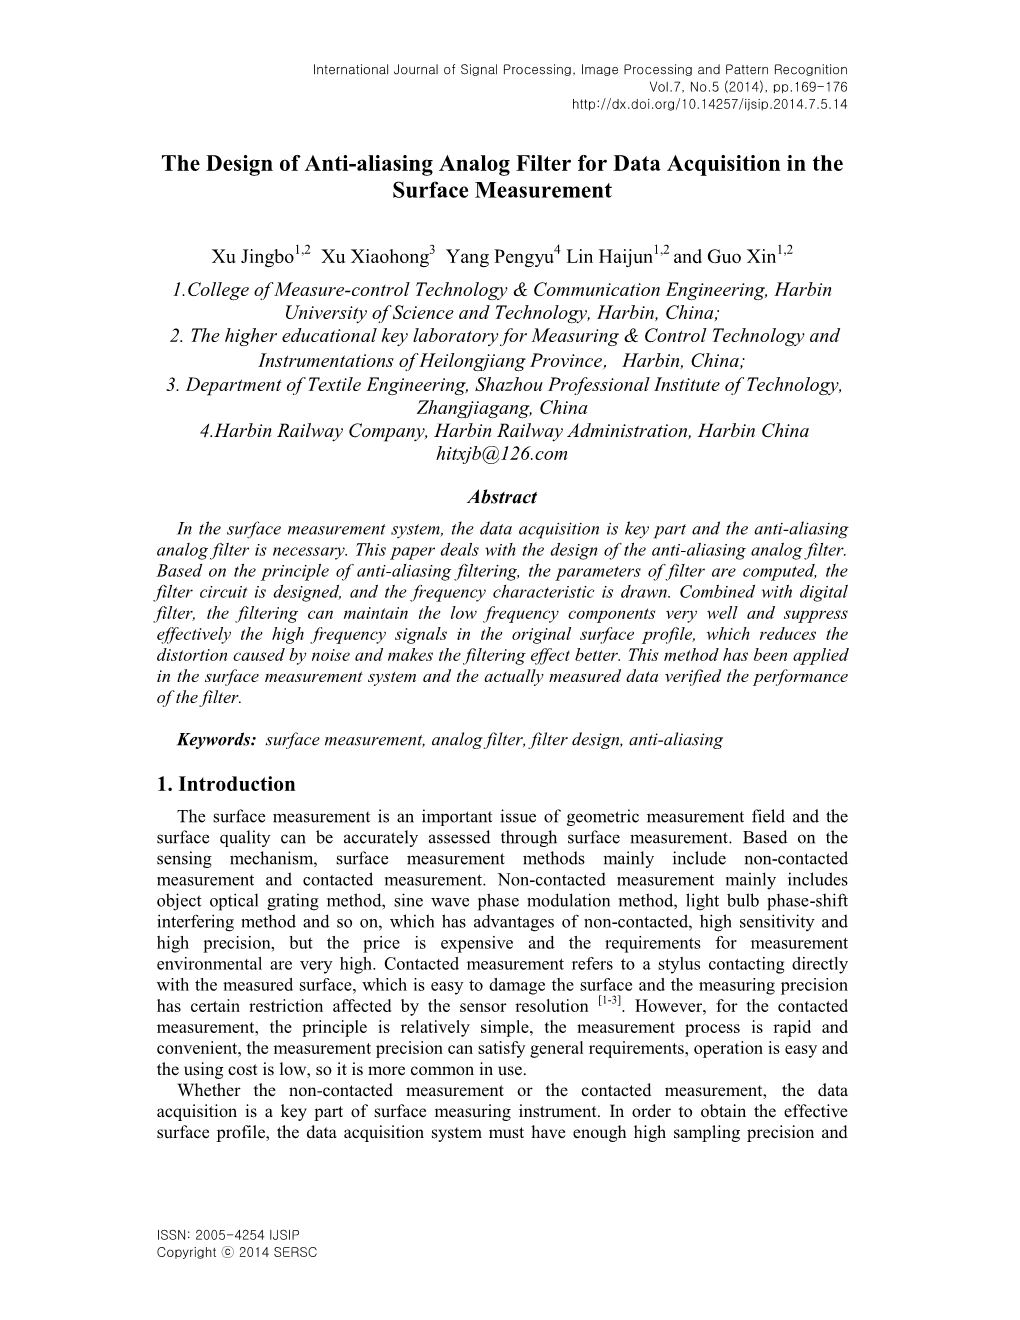 The Design of Anti-Aliasing Analog Filter for Data Acquisition in the Surface Measurement